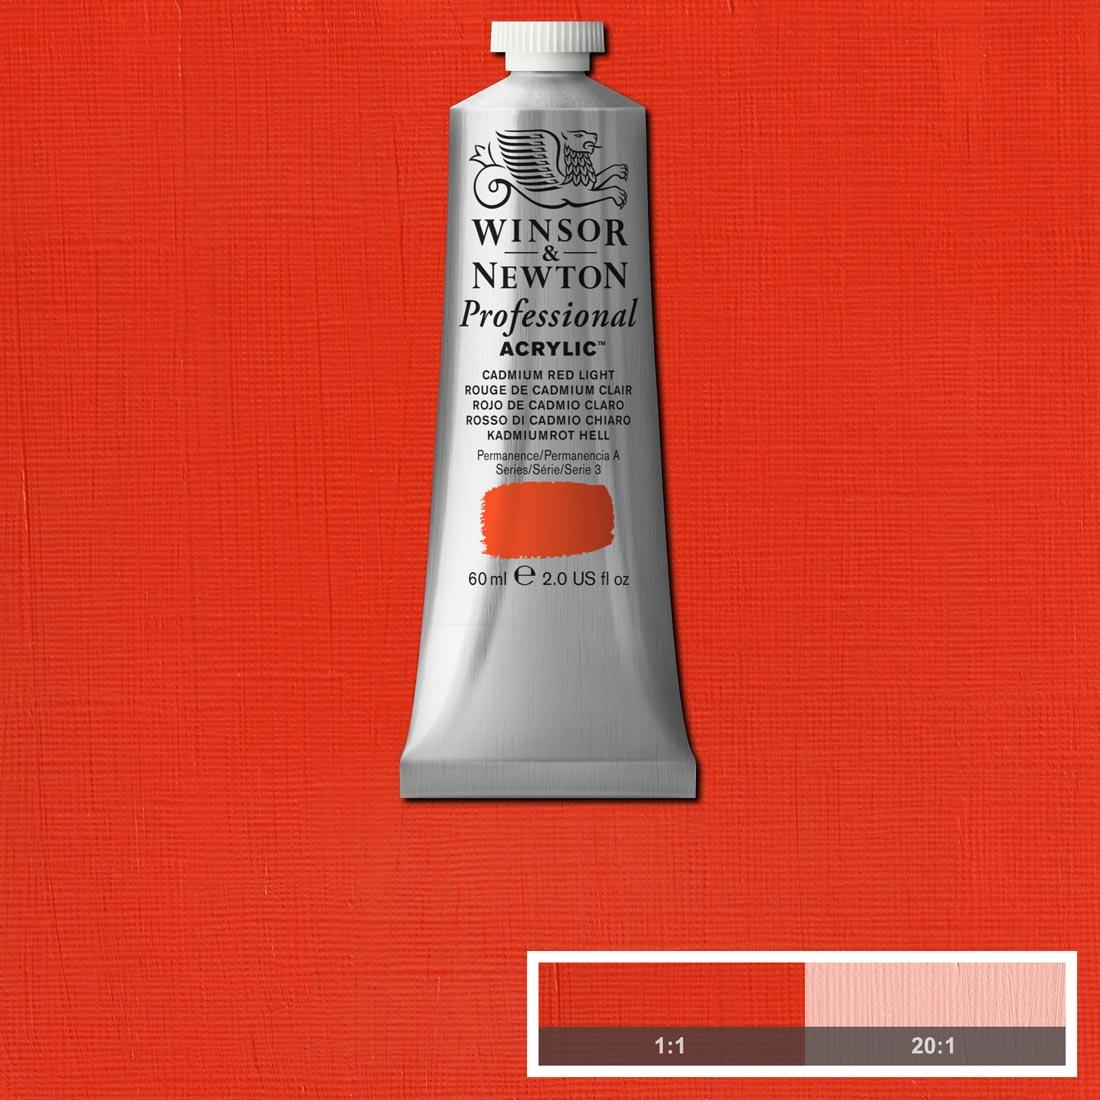 tube of Winsor and Newton Professional Acrylic Cadmium Red Light with paint swatch in the background